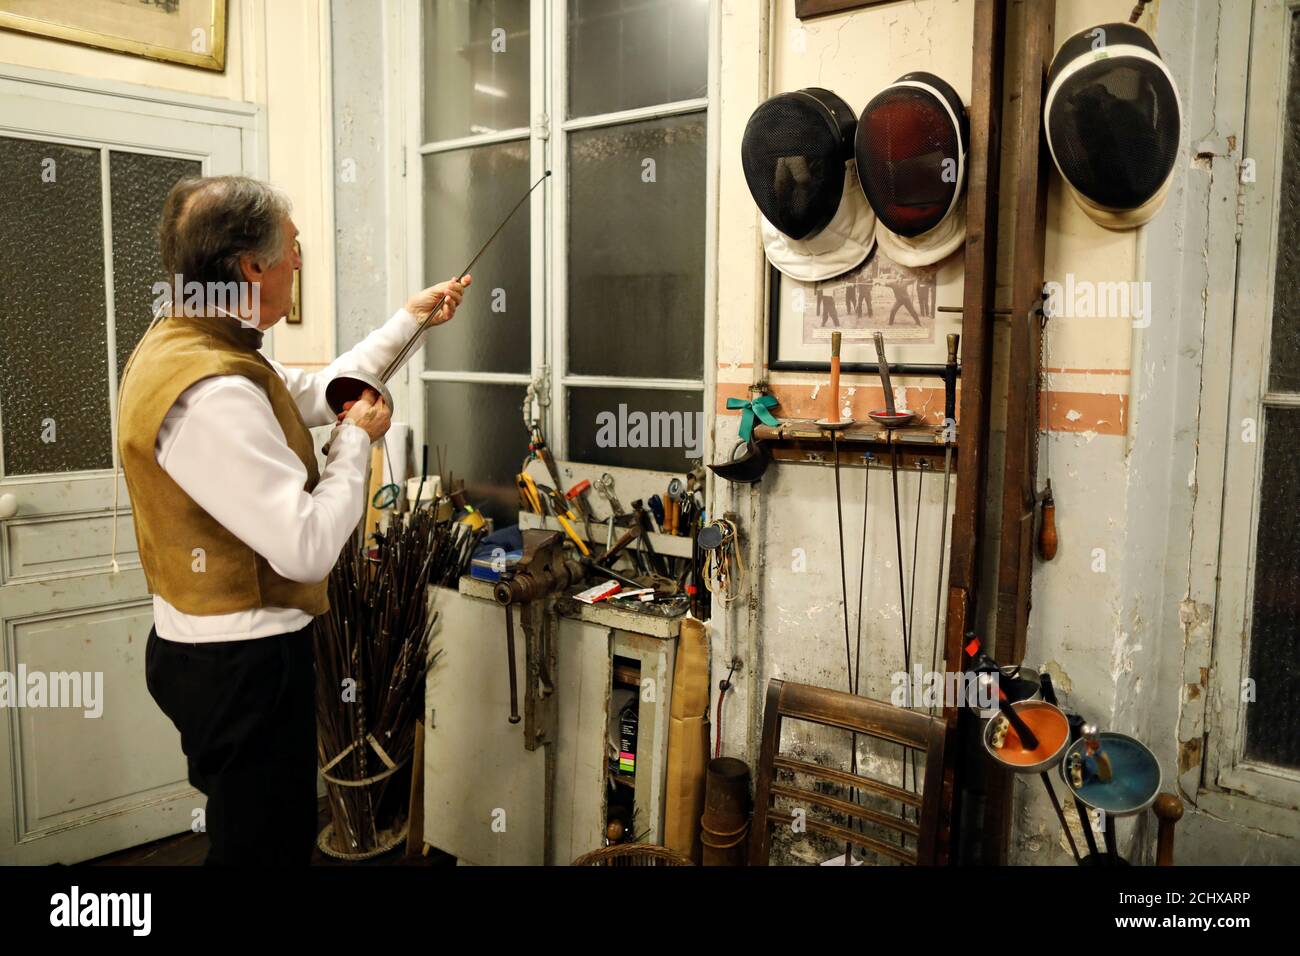 Master Jean-Pierre Pinel La Taule fixes an epee at the Salle d'Armes  Coudurier in the Quartier Latin in central Paris, France, January 28, 2019.  This oldest fencing club in Paris, founded in